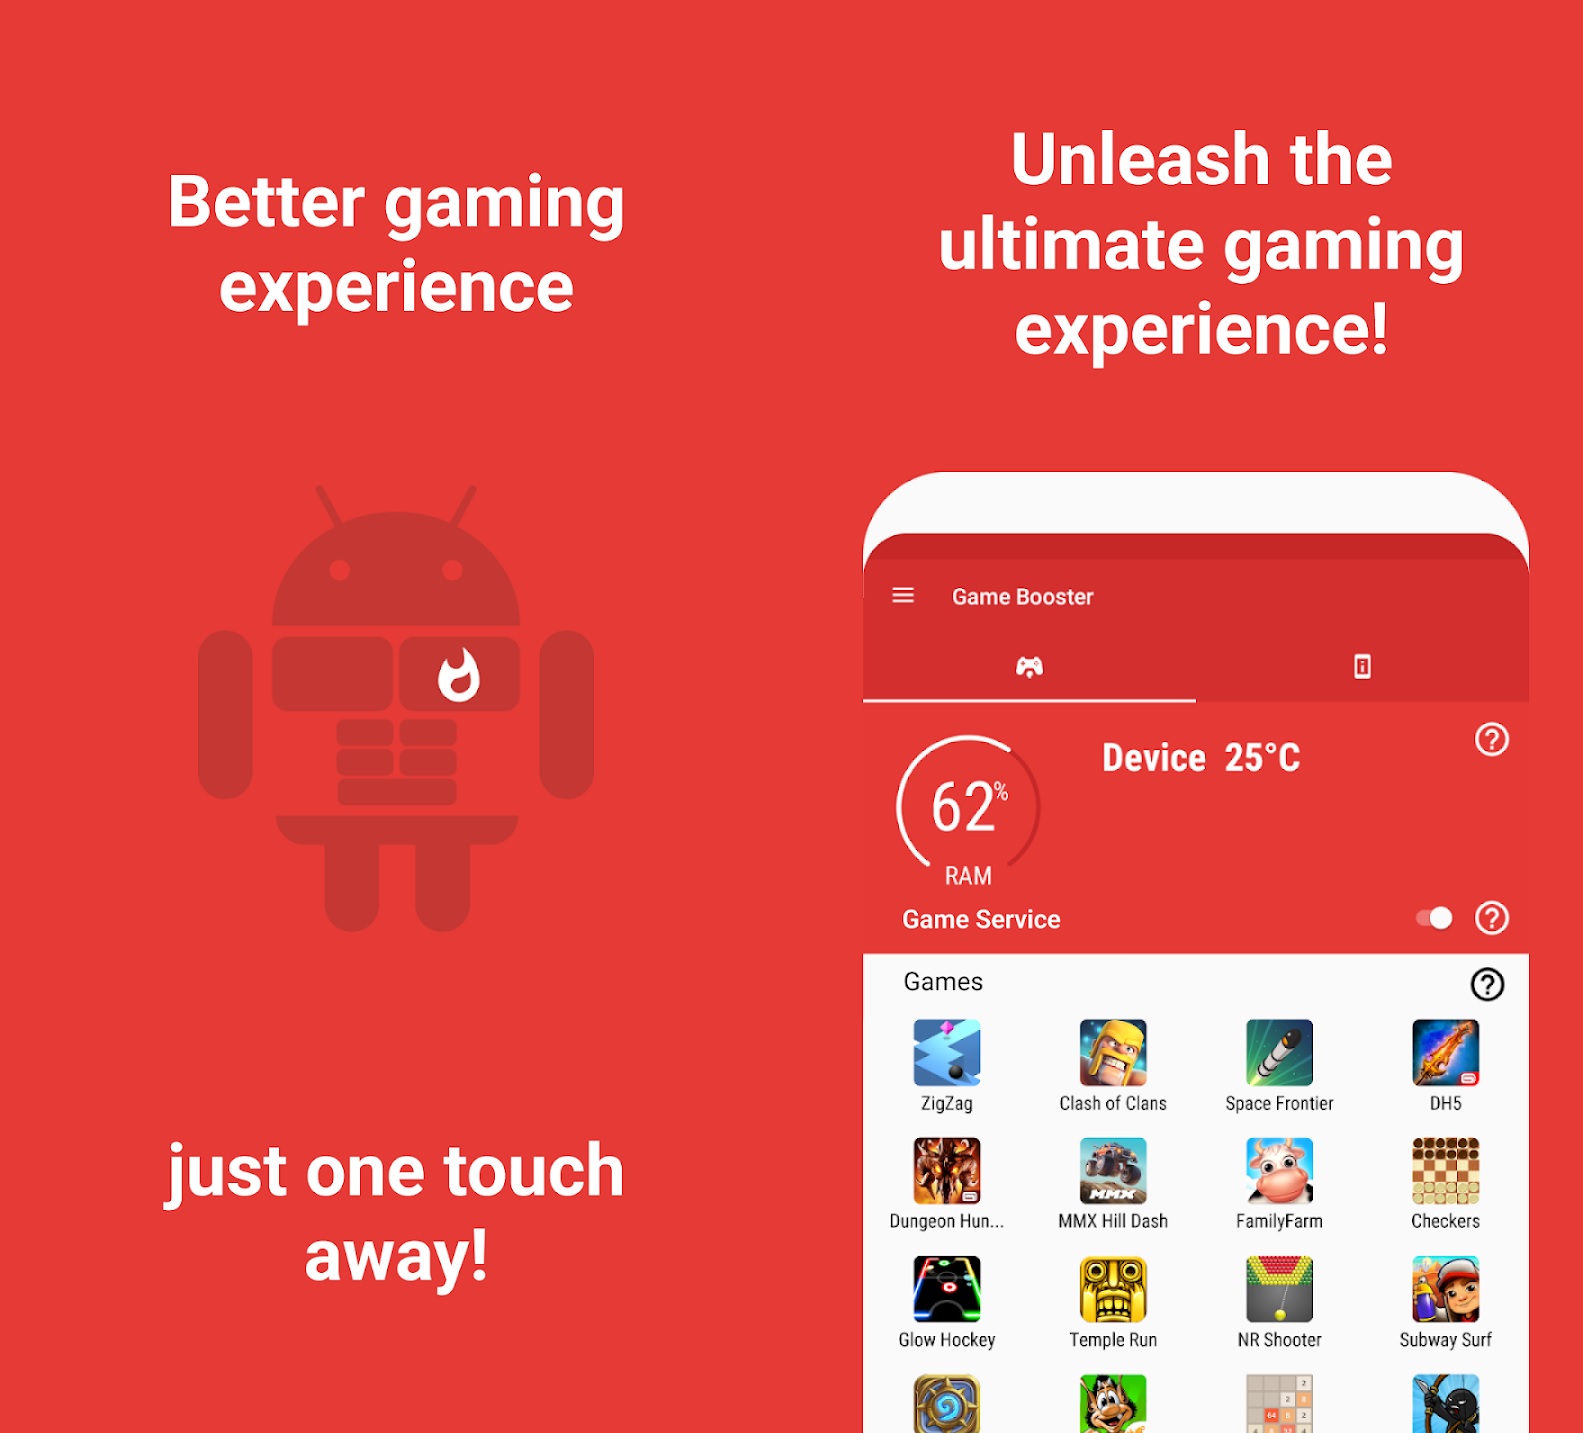 GAME BOOSTER GAME LAUNCHER APK DOWNLOAD 2023